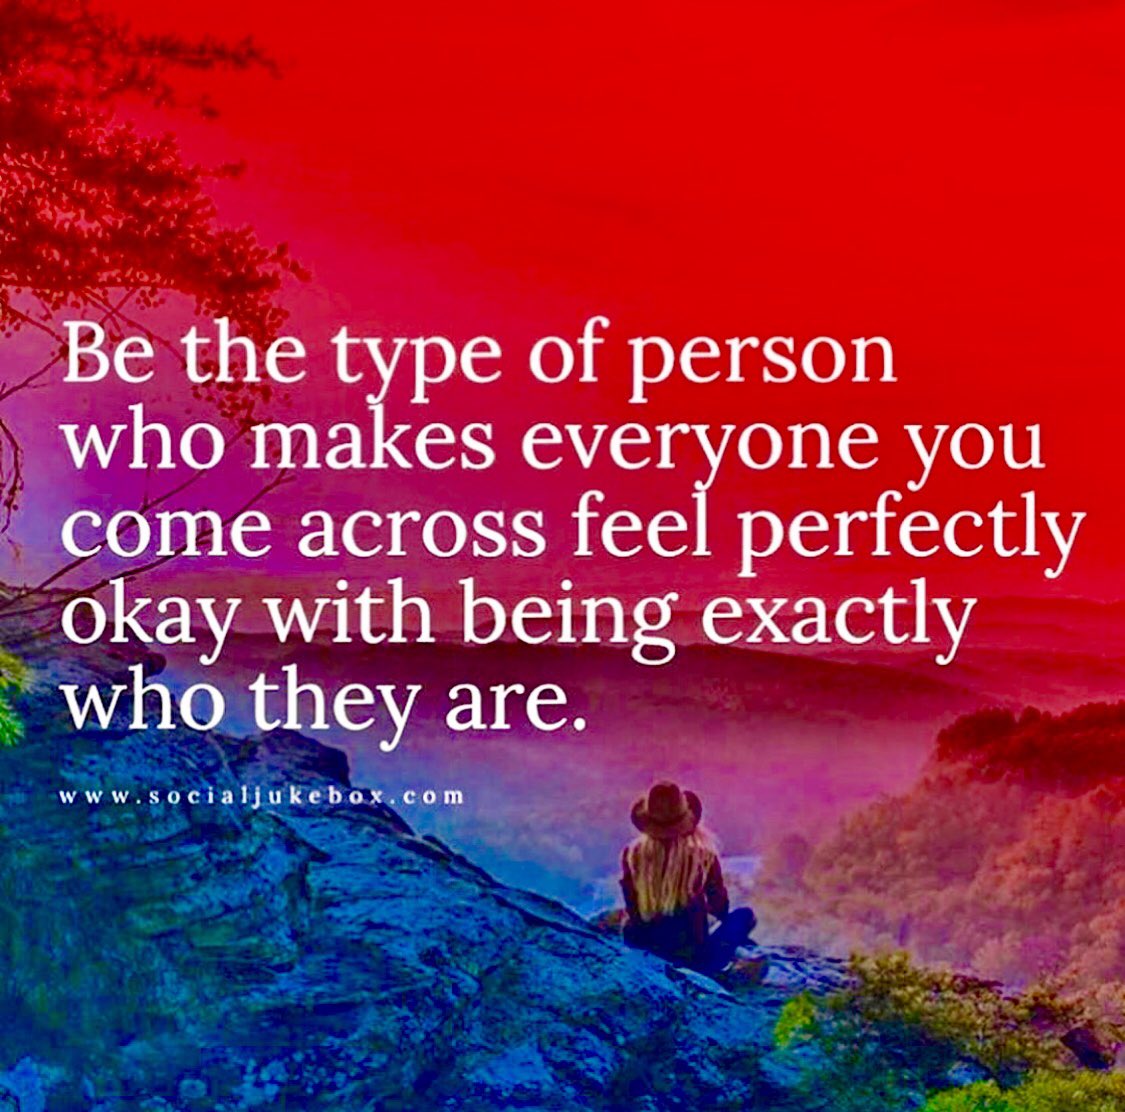 Be The Type Of Person Who Makes Everyone You Come Across Feel Perfectly Okay With Being Exactly Who They Are. (via @10MillionMiler & SocialJukebox.com)